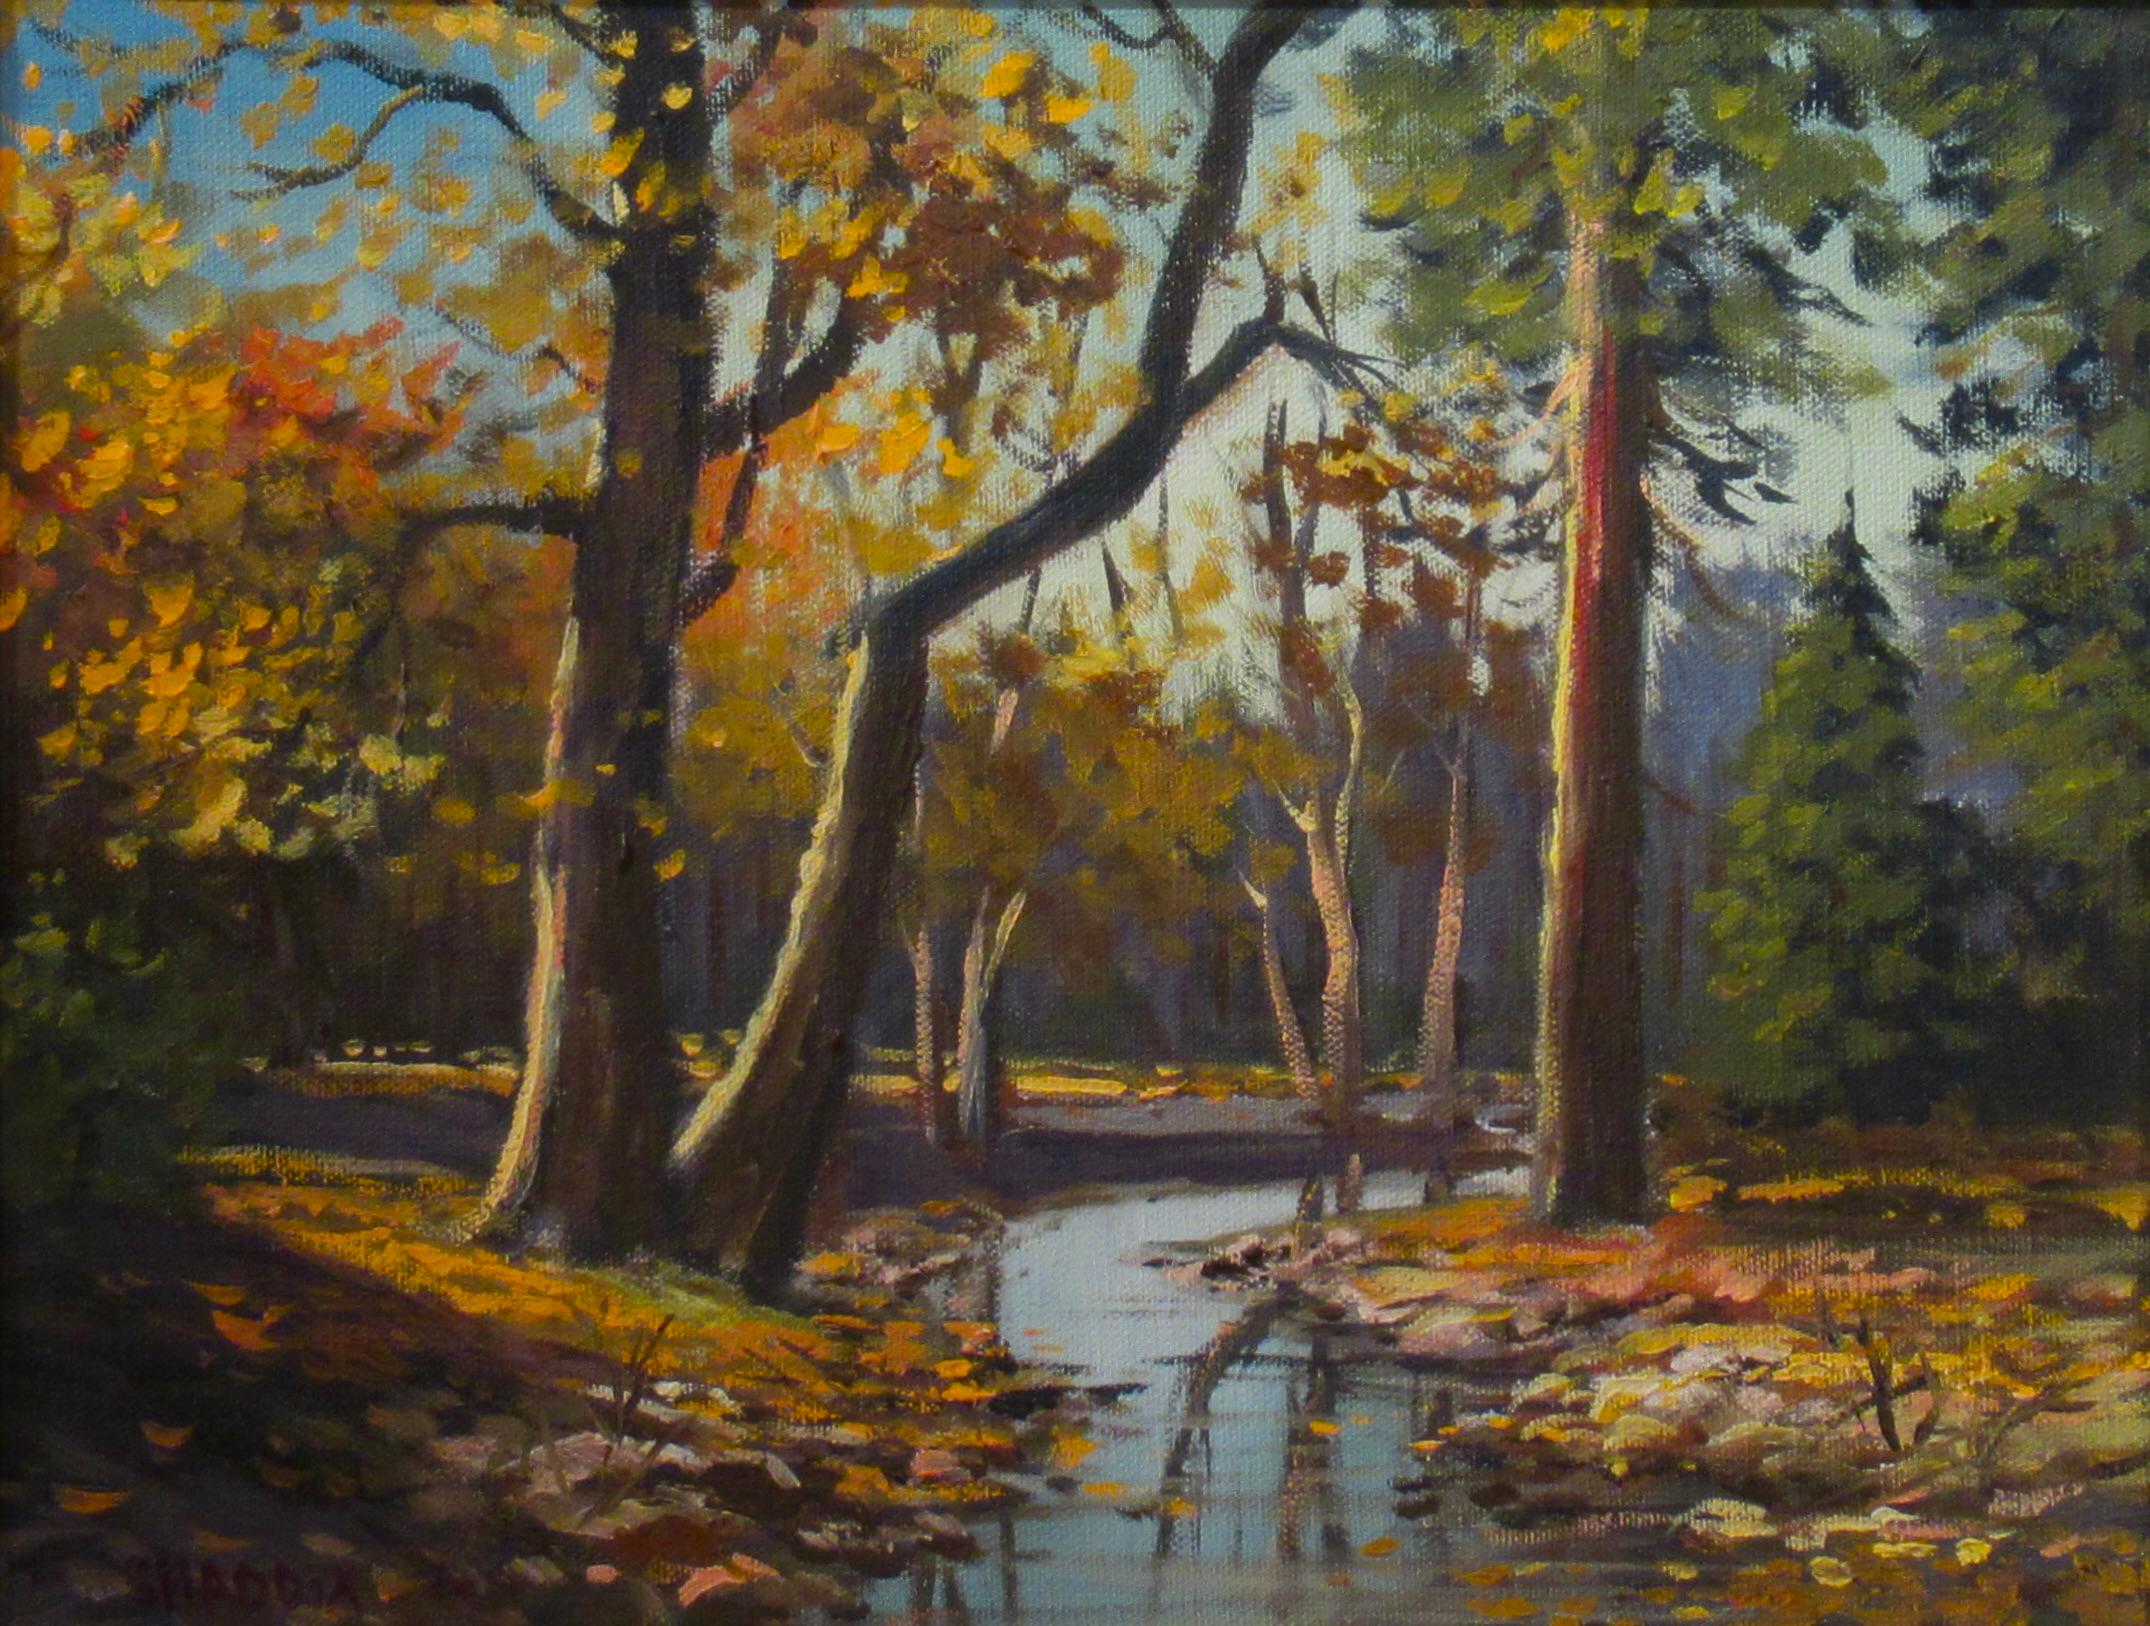 California Landscape in Autumn - Painting by Bill Shaddix